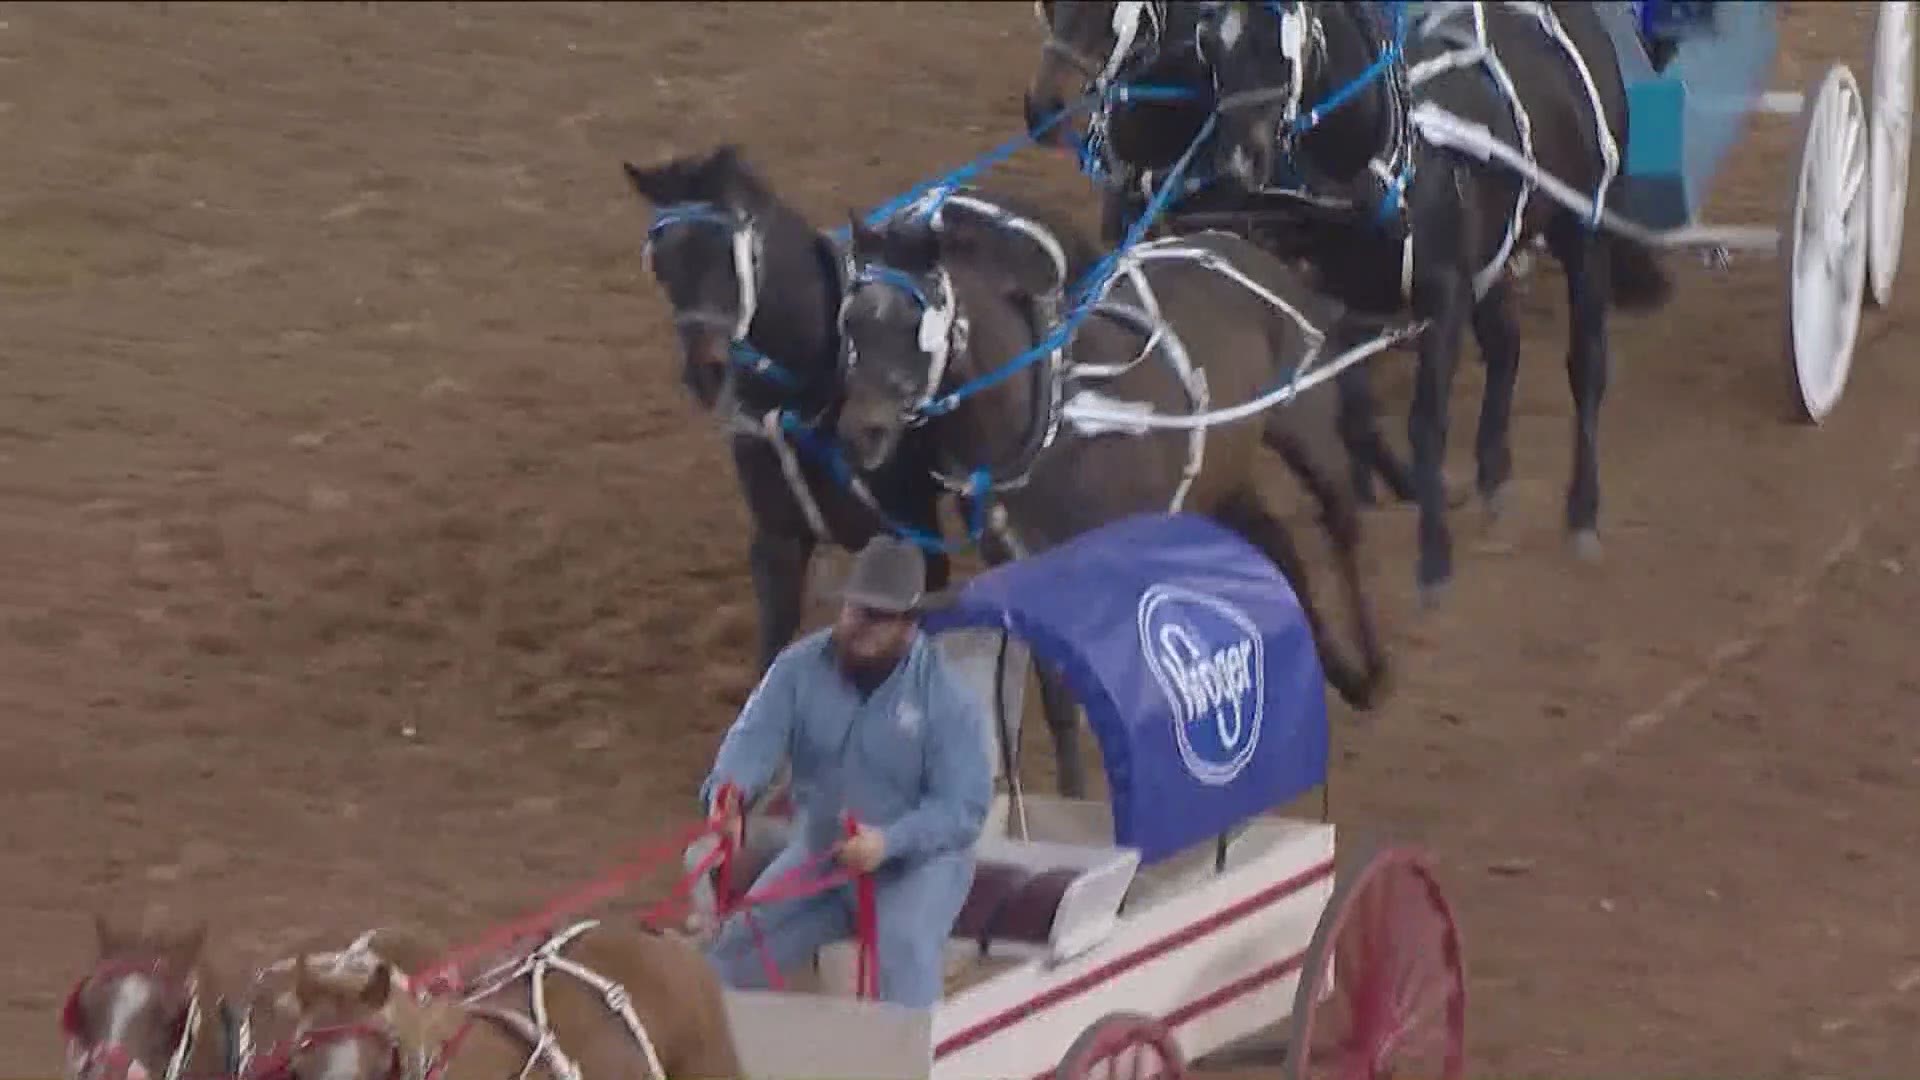 Chuck wagon races at RodeoHouston on March 11, 2019